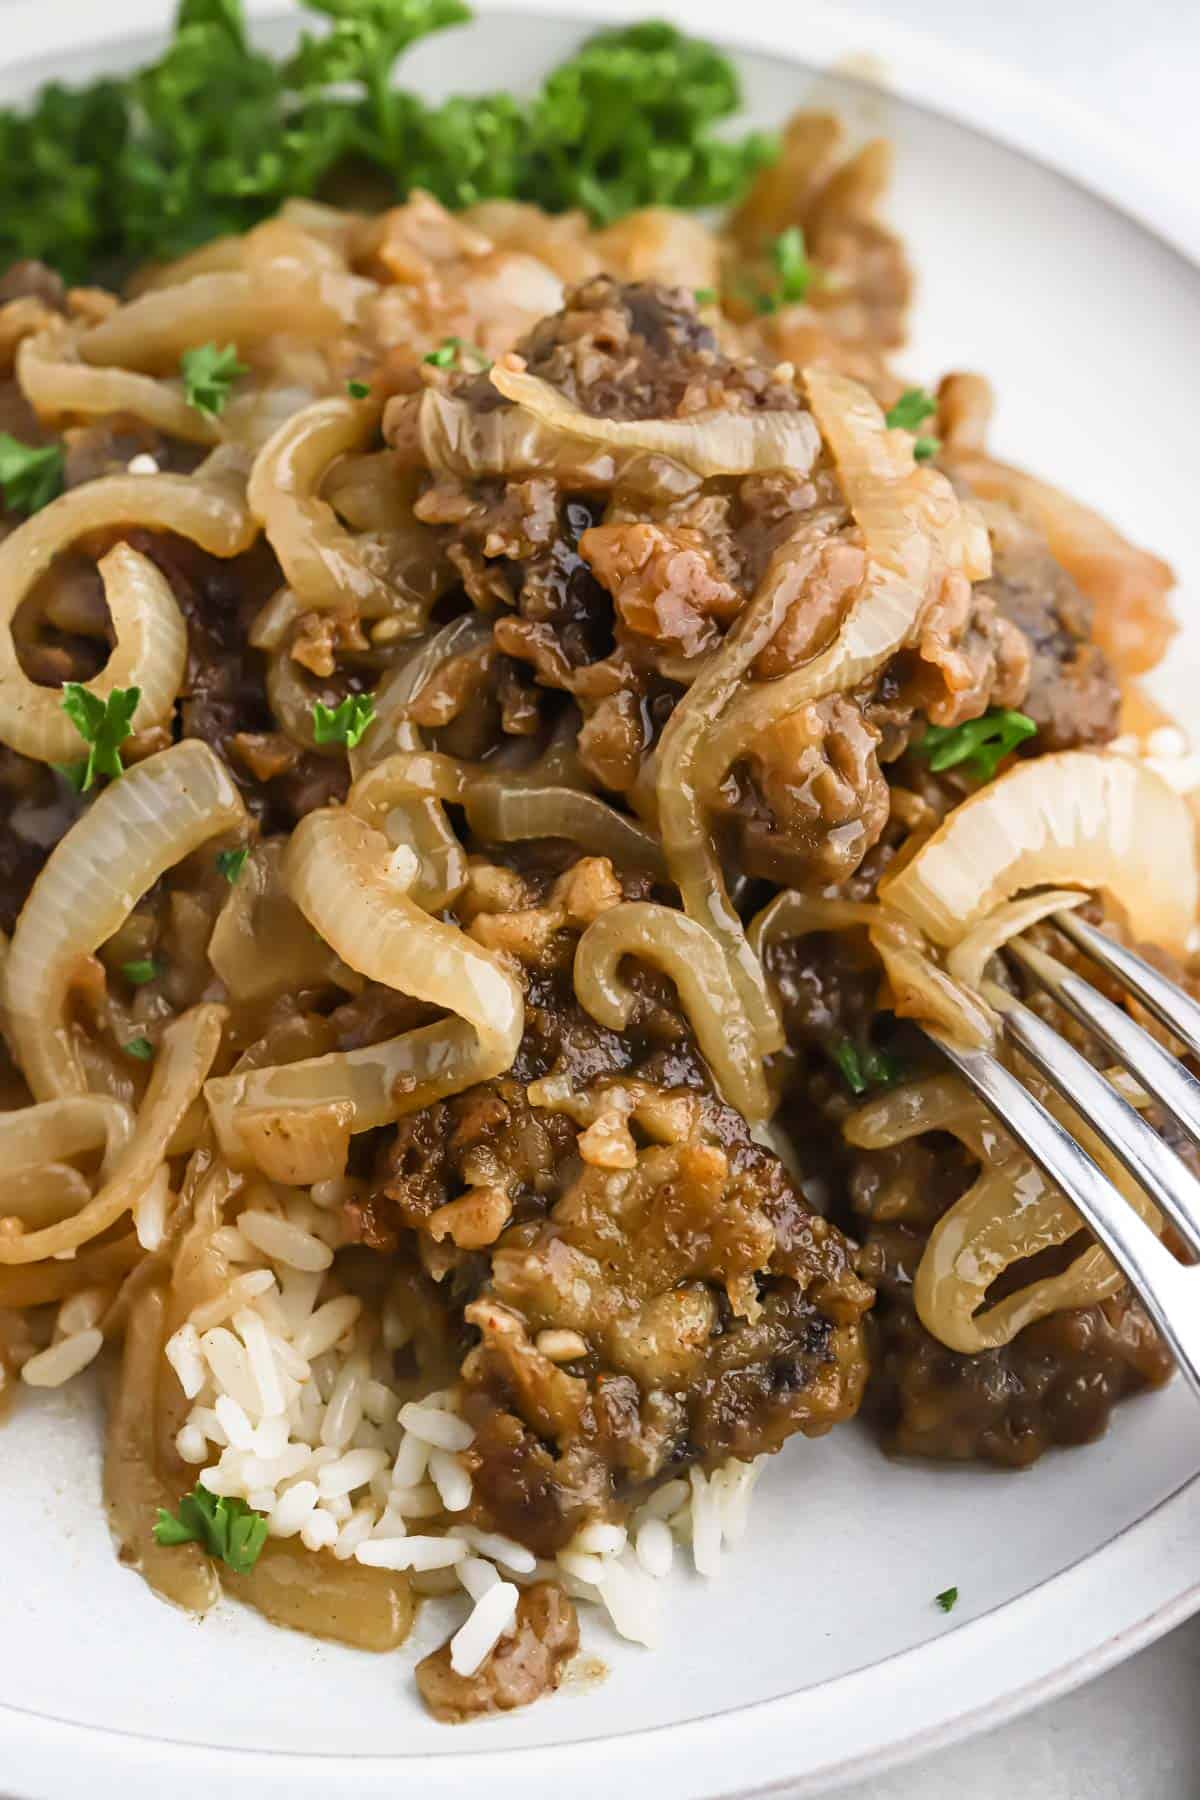 Liver and onion recipe served over white rice on a white plate